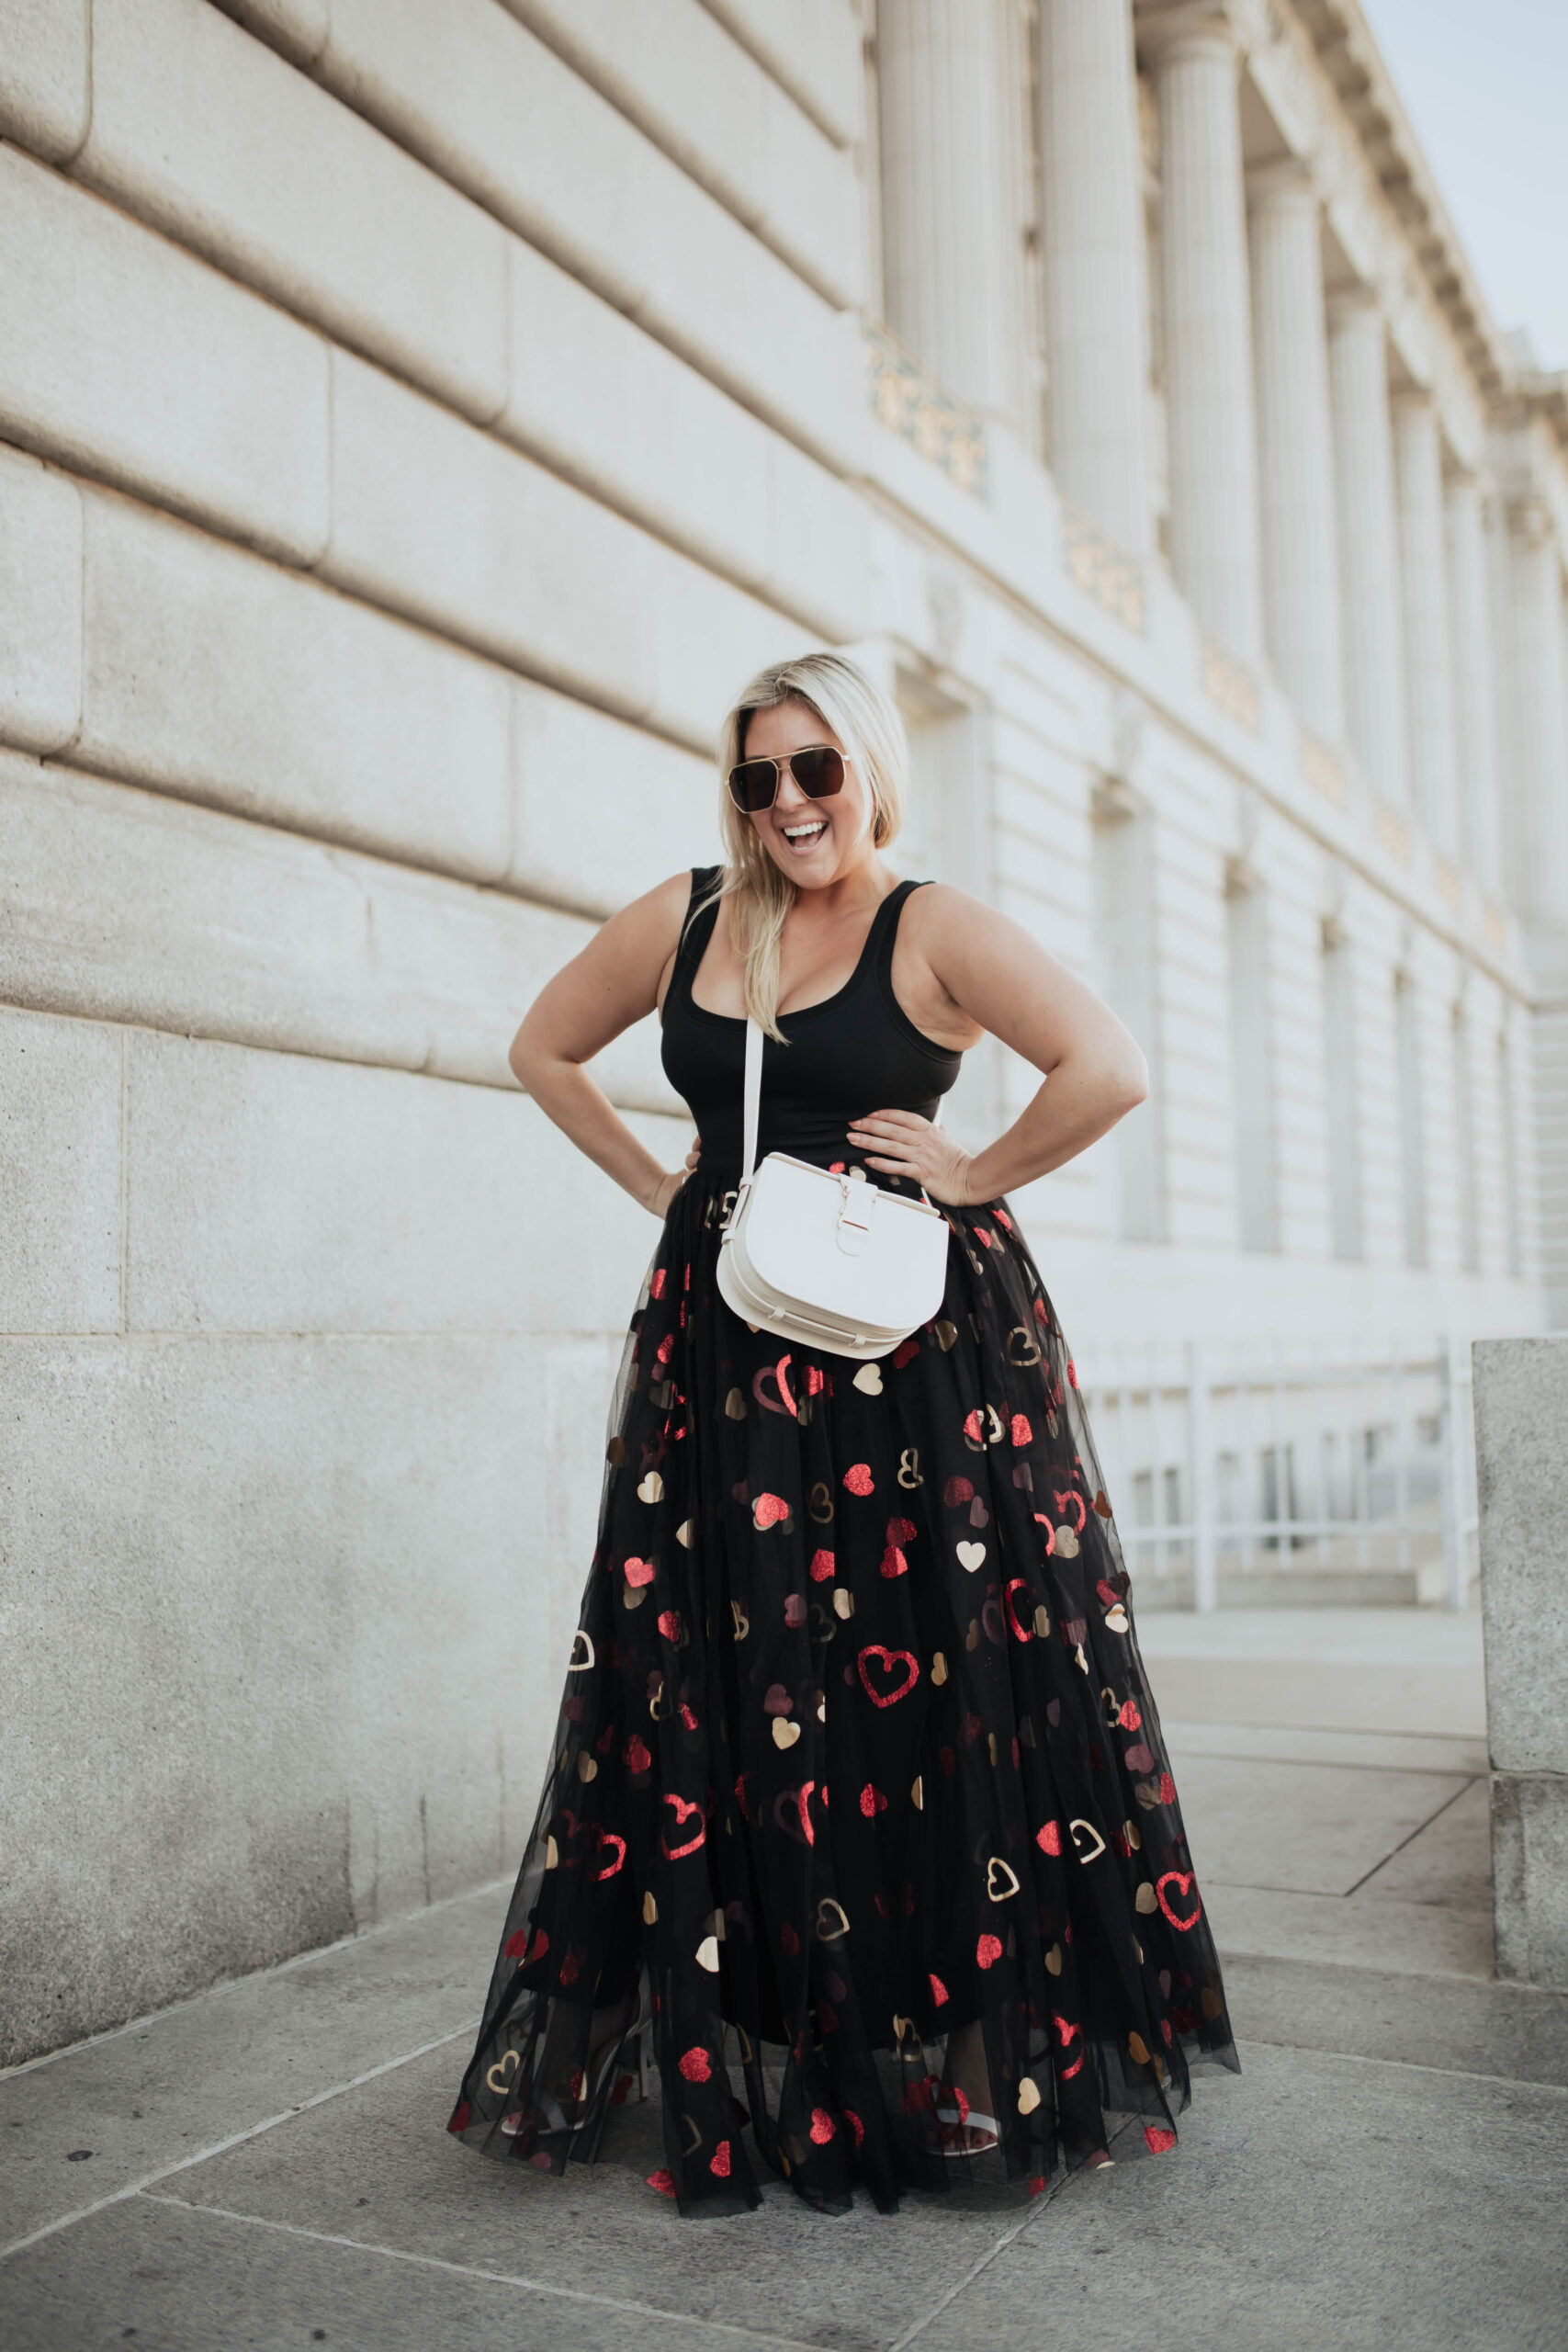 Fashion Blogger KatWalkSF celebrates Valentine's Day at San Francisco city hall wearing an ASOS heart tulle skirt and SPANX bodysuit.